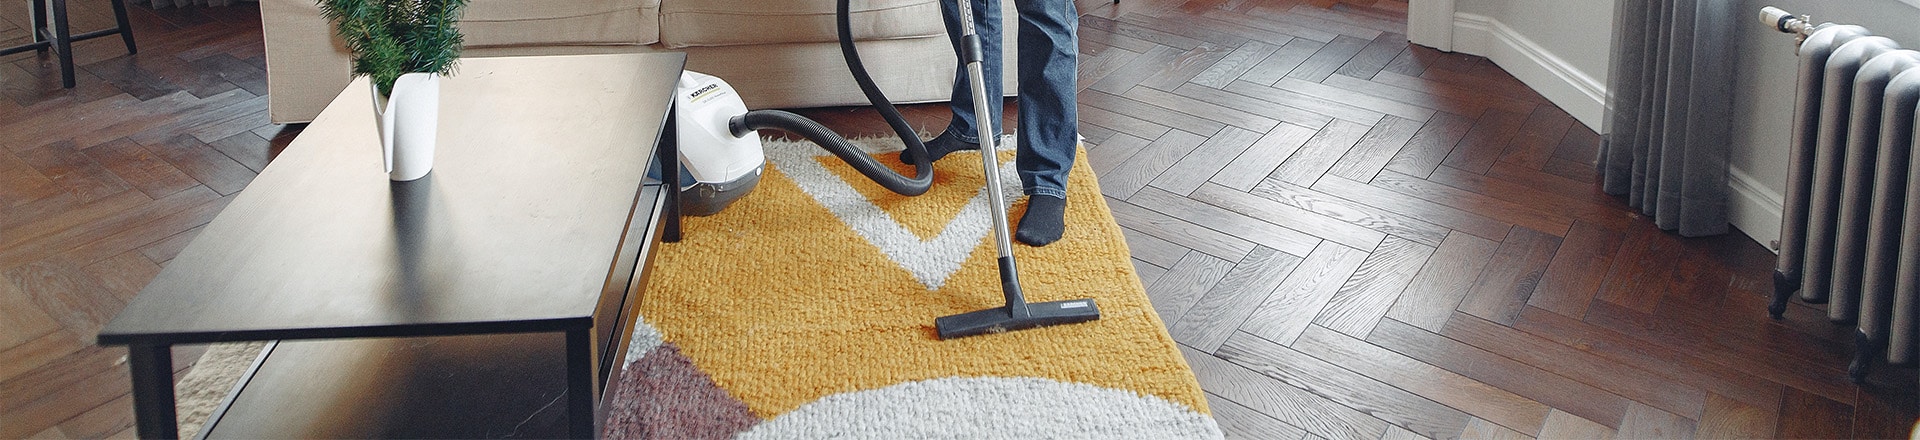 11Comparing Different Techniques for Cleaning Carpets